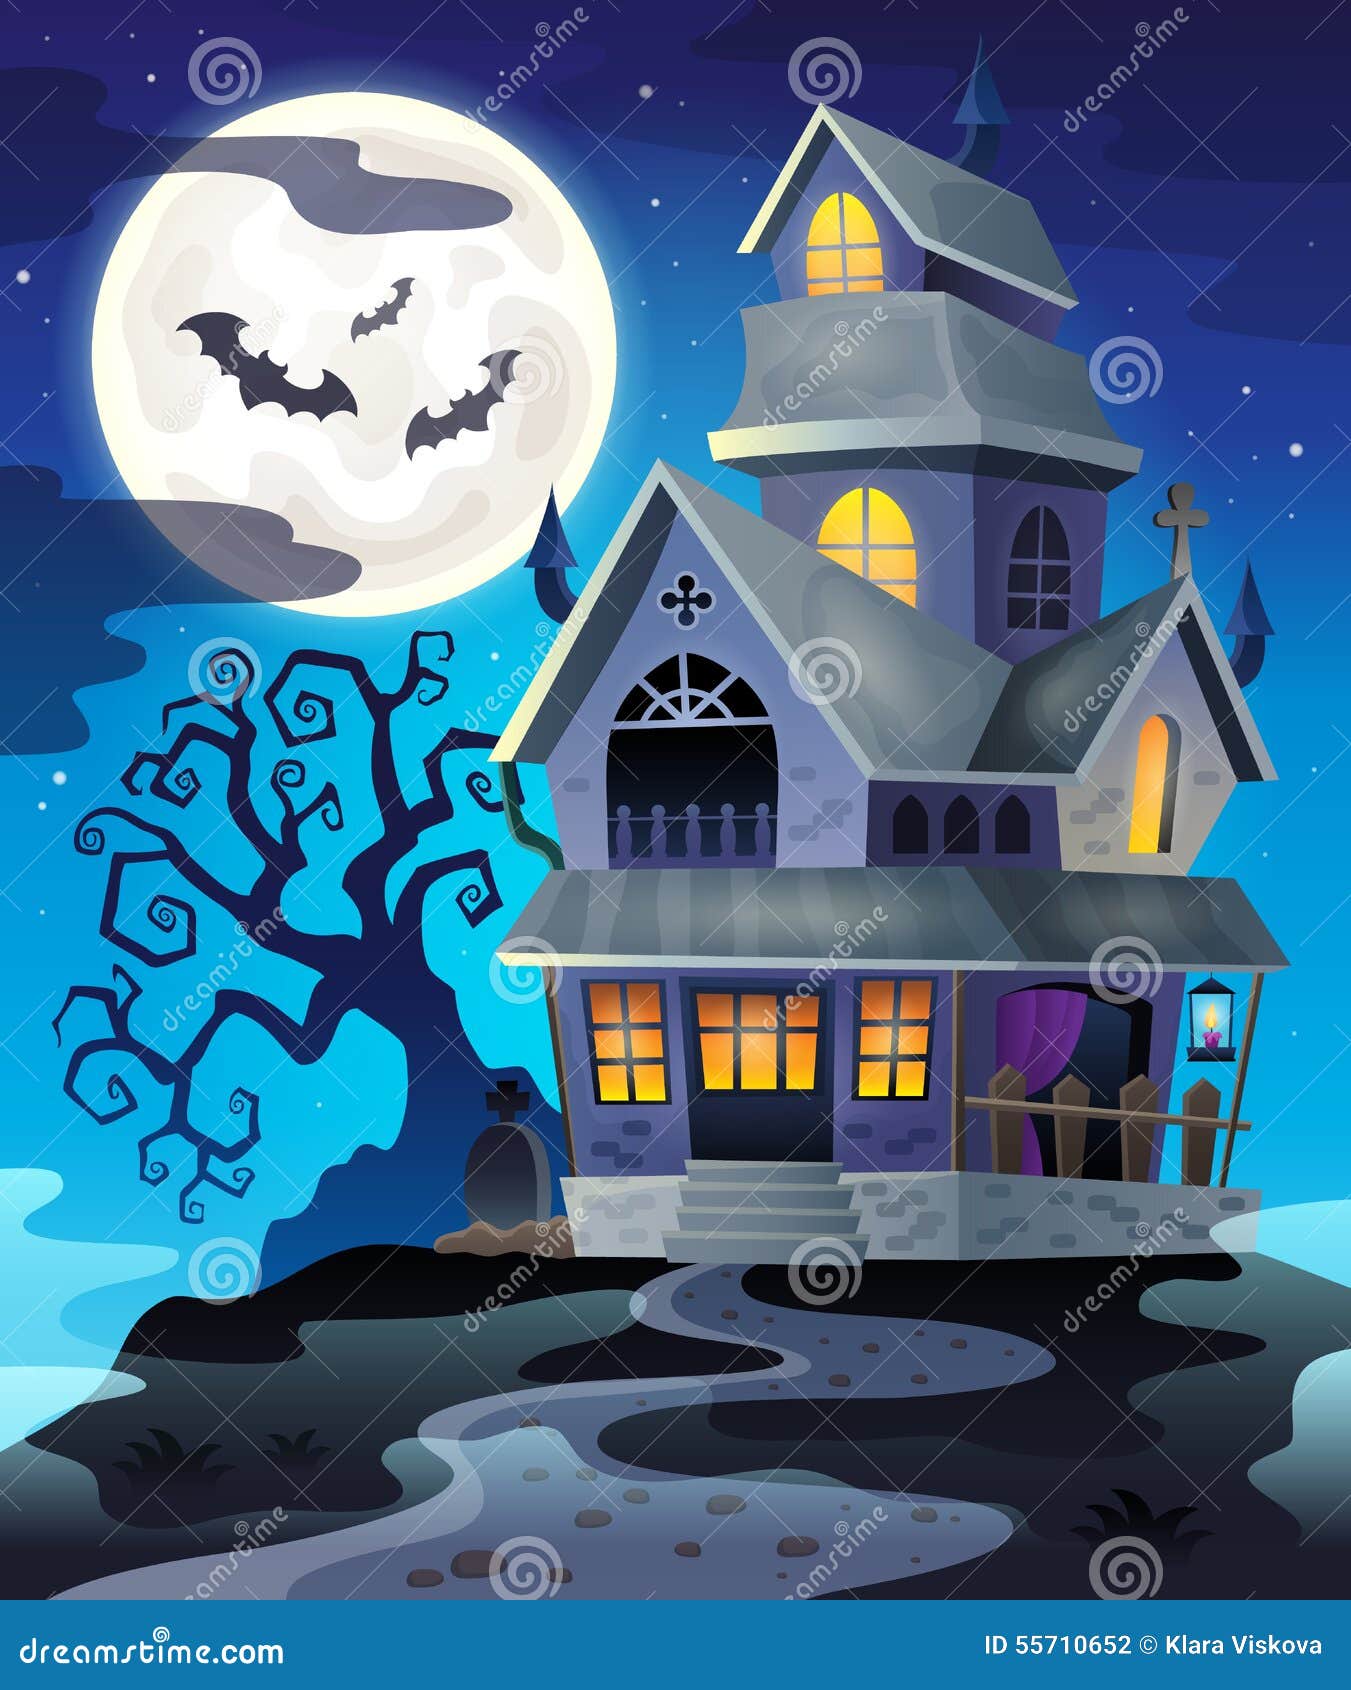 image with haunted house thematics 3